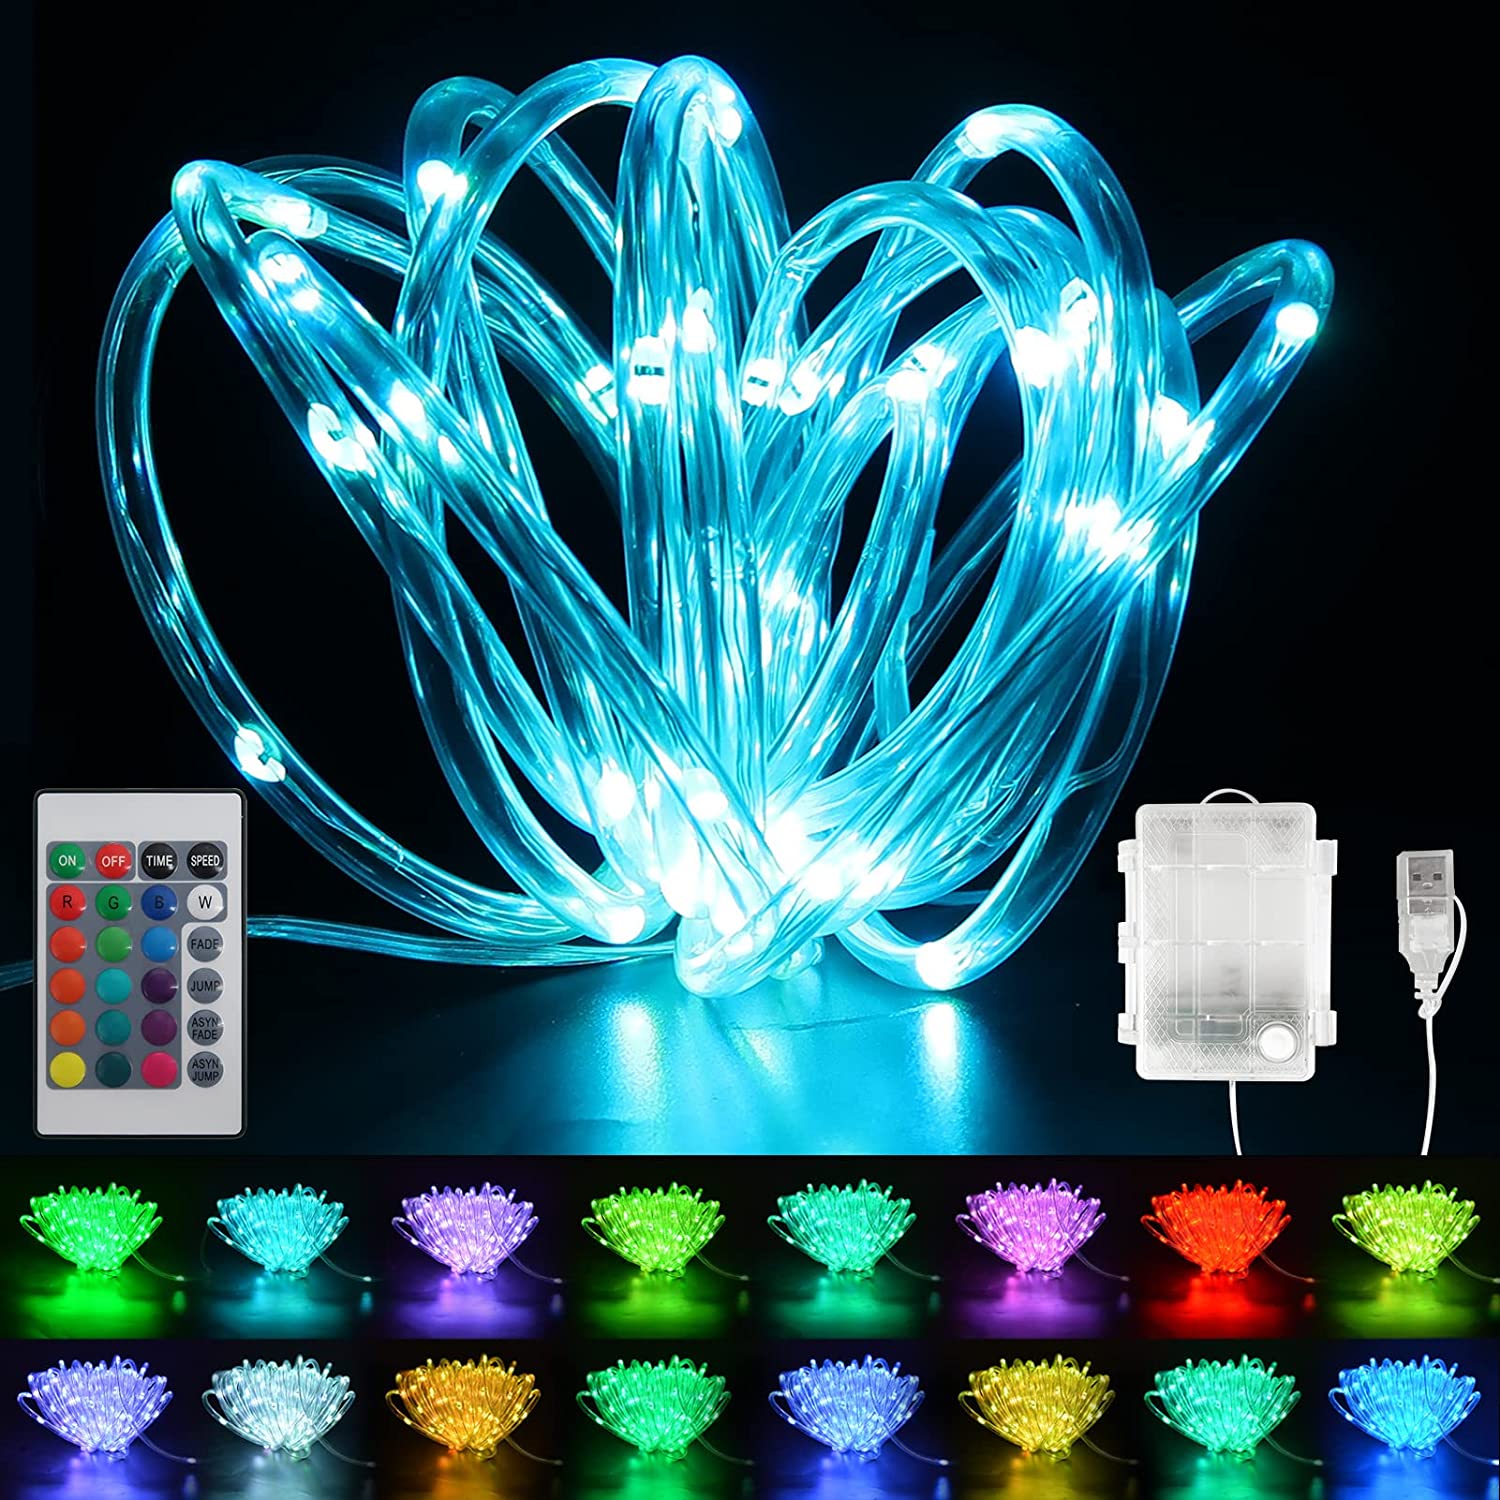 QyWyII Rope Lights Battery Operated 50 LED 16FT 4 Mode 16 Color Changing Light with Remote Control for Wedding Garden Patio Holiday Bedroom Decoration